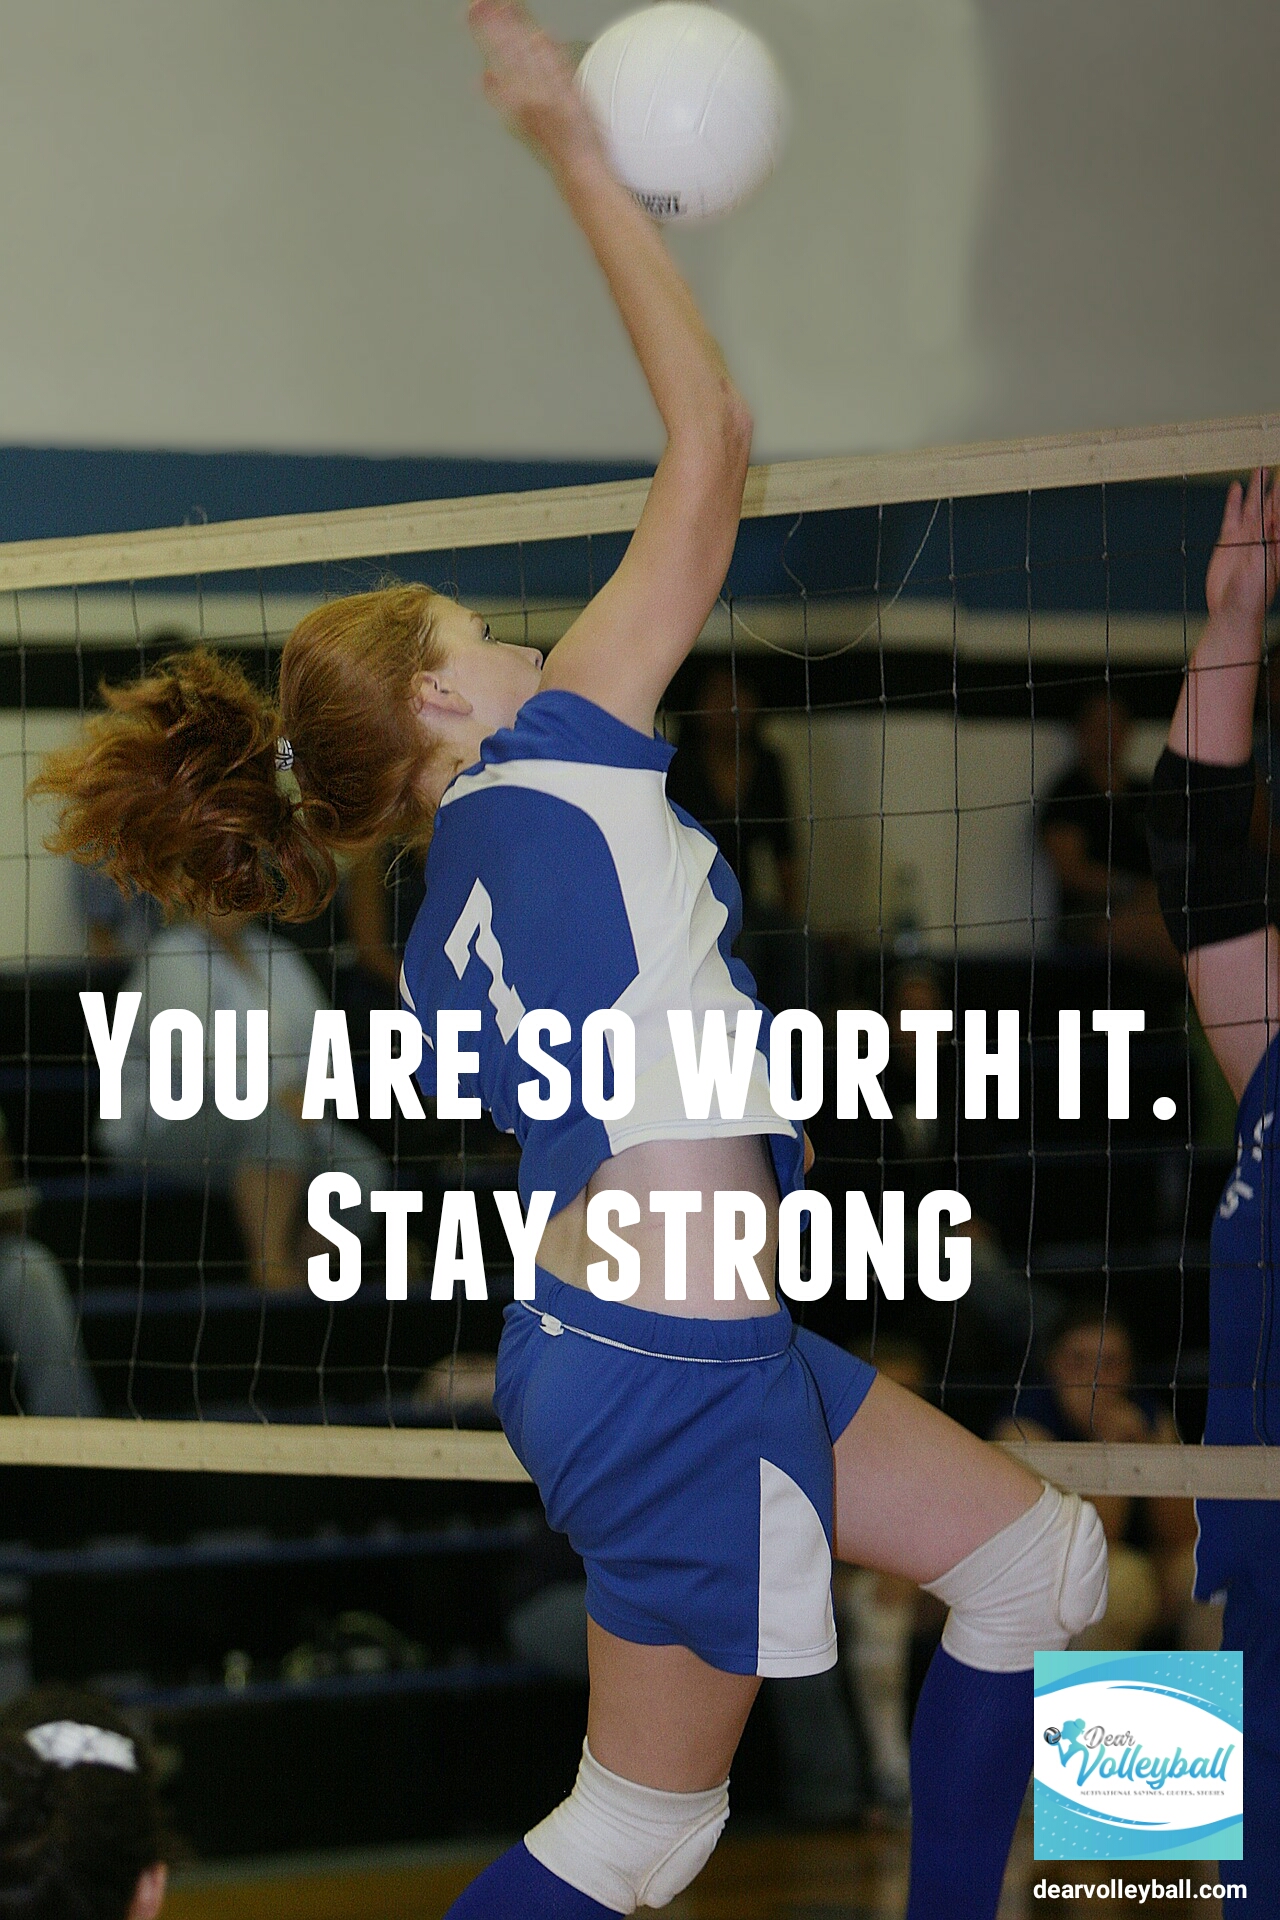 You are so worth it, stay strong and other quotes on motivation on DearVolleyball.com